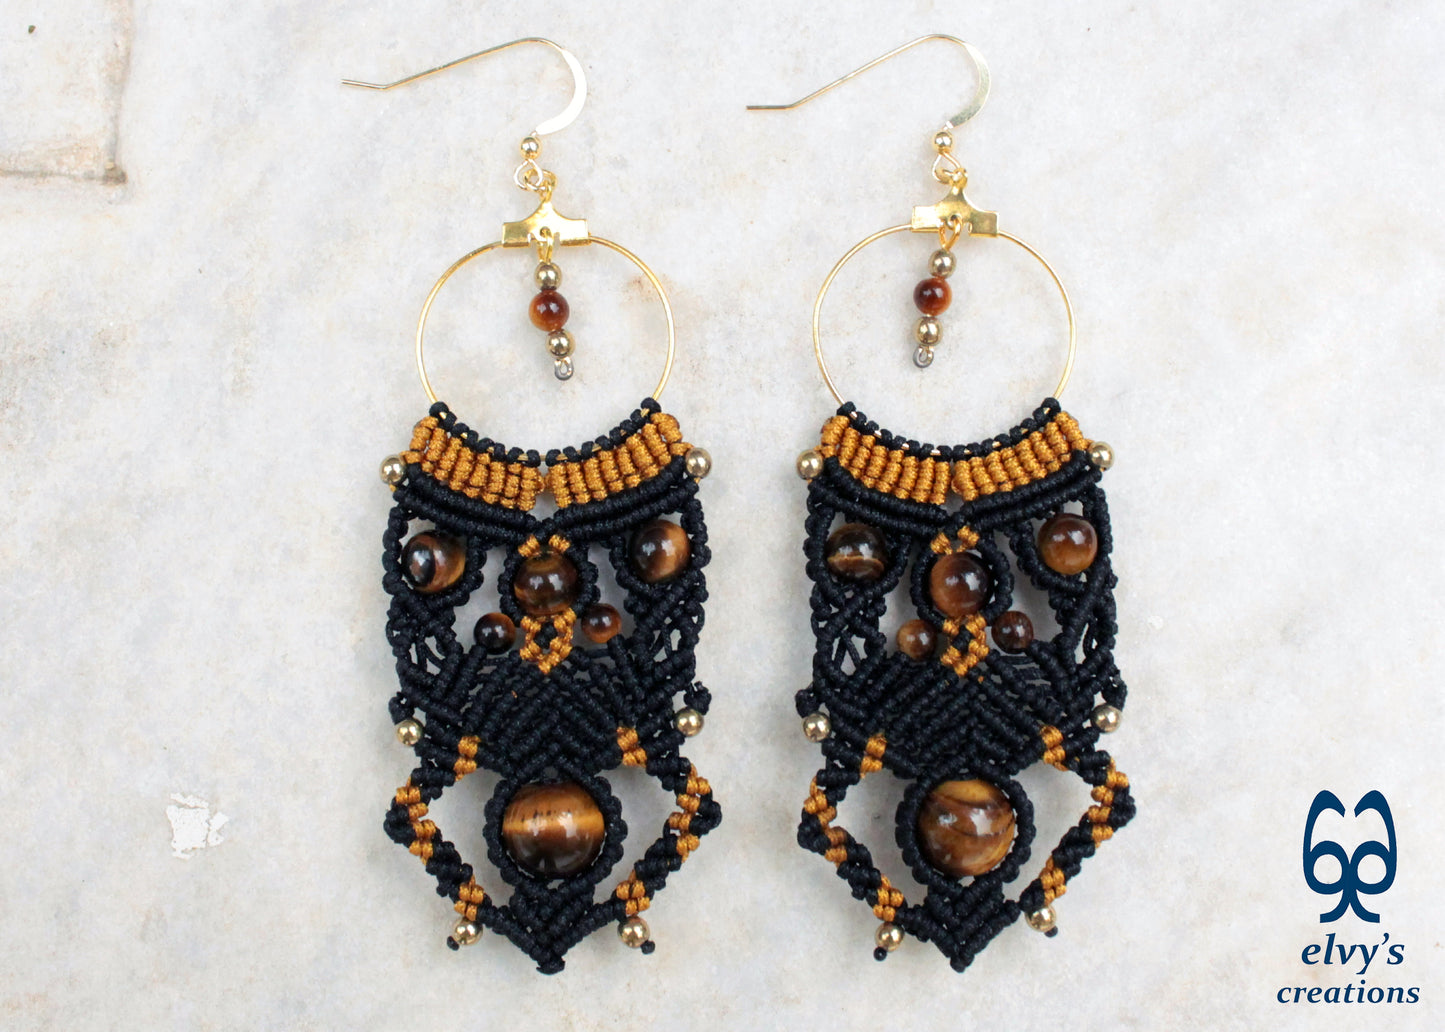 Black and Gold Macramé Earrings with Tiger Eye and Hematite Gemstones